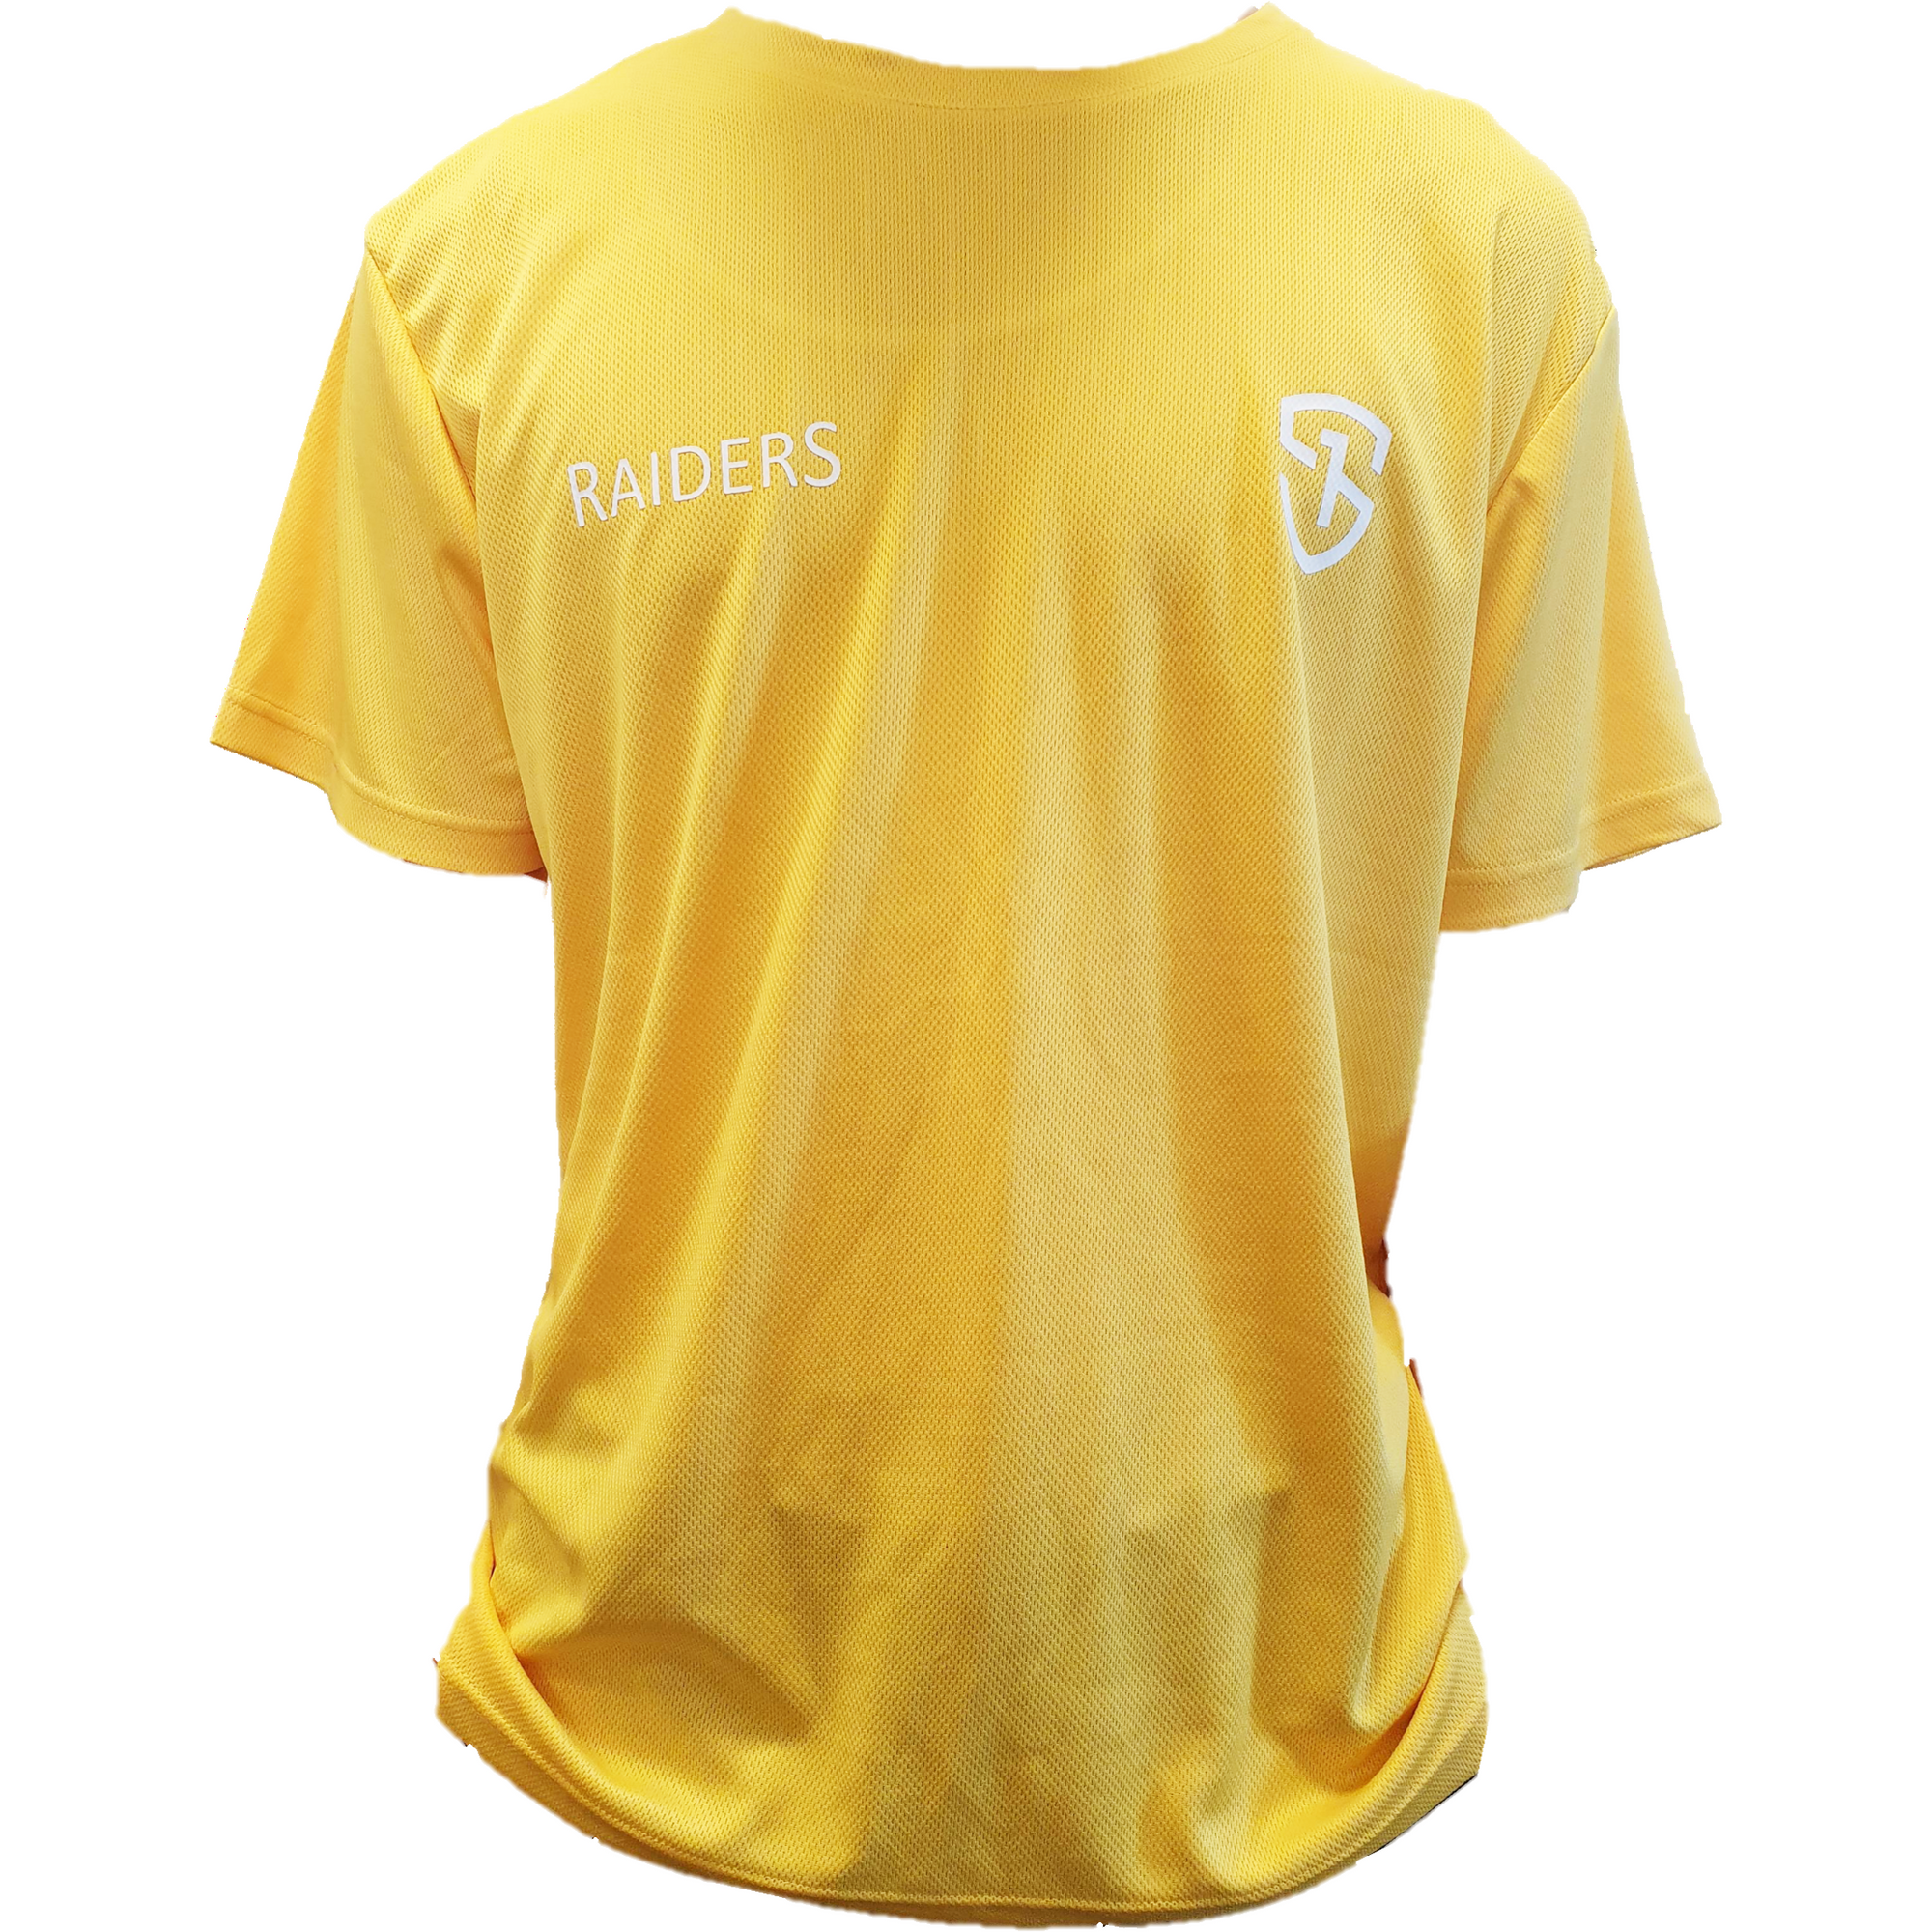 House Team Sports T-shirt Yellow Size 22